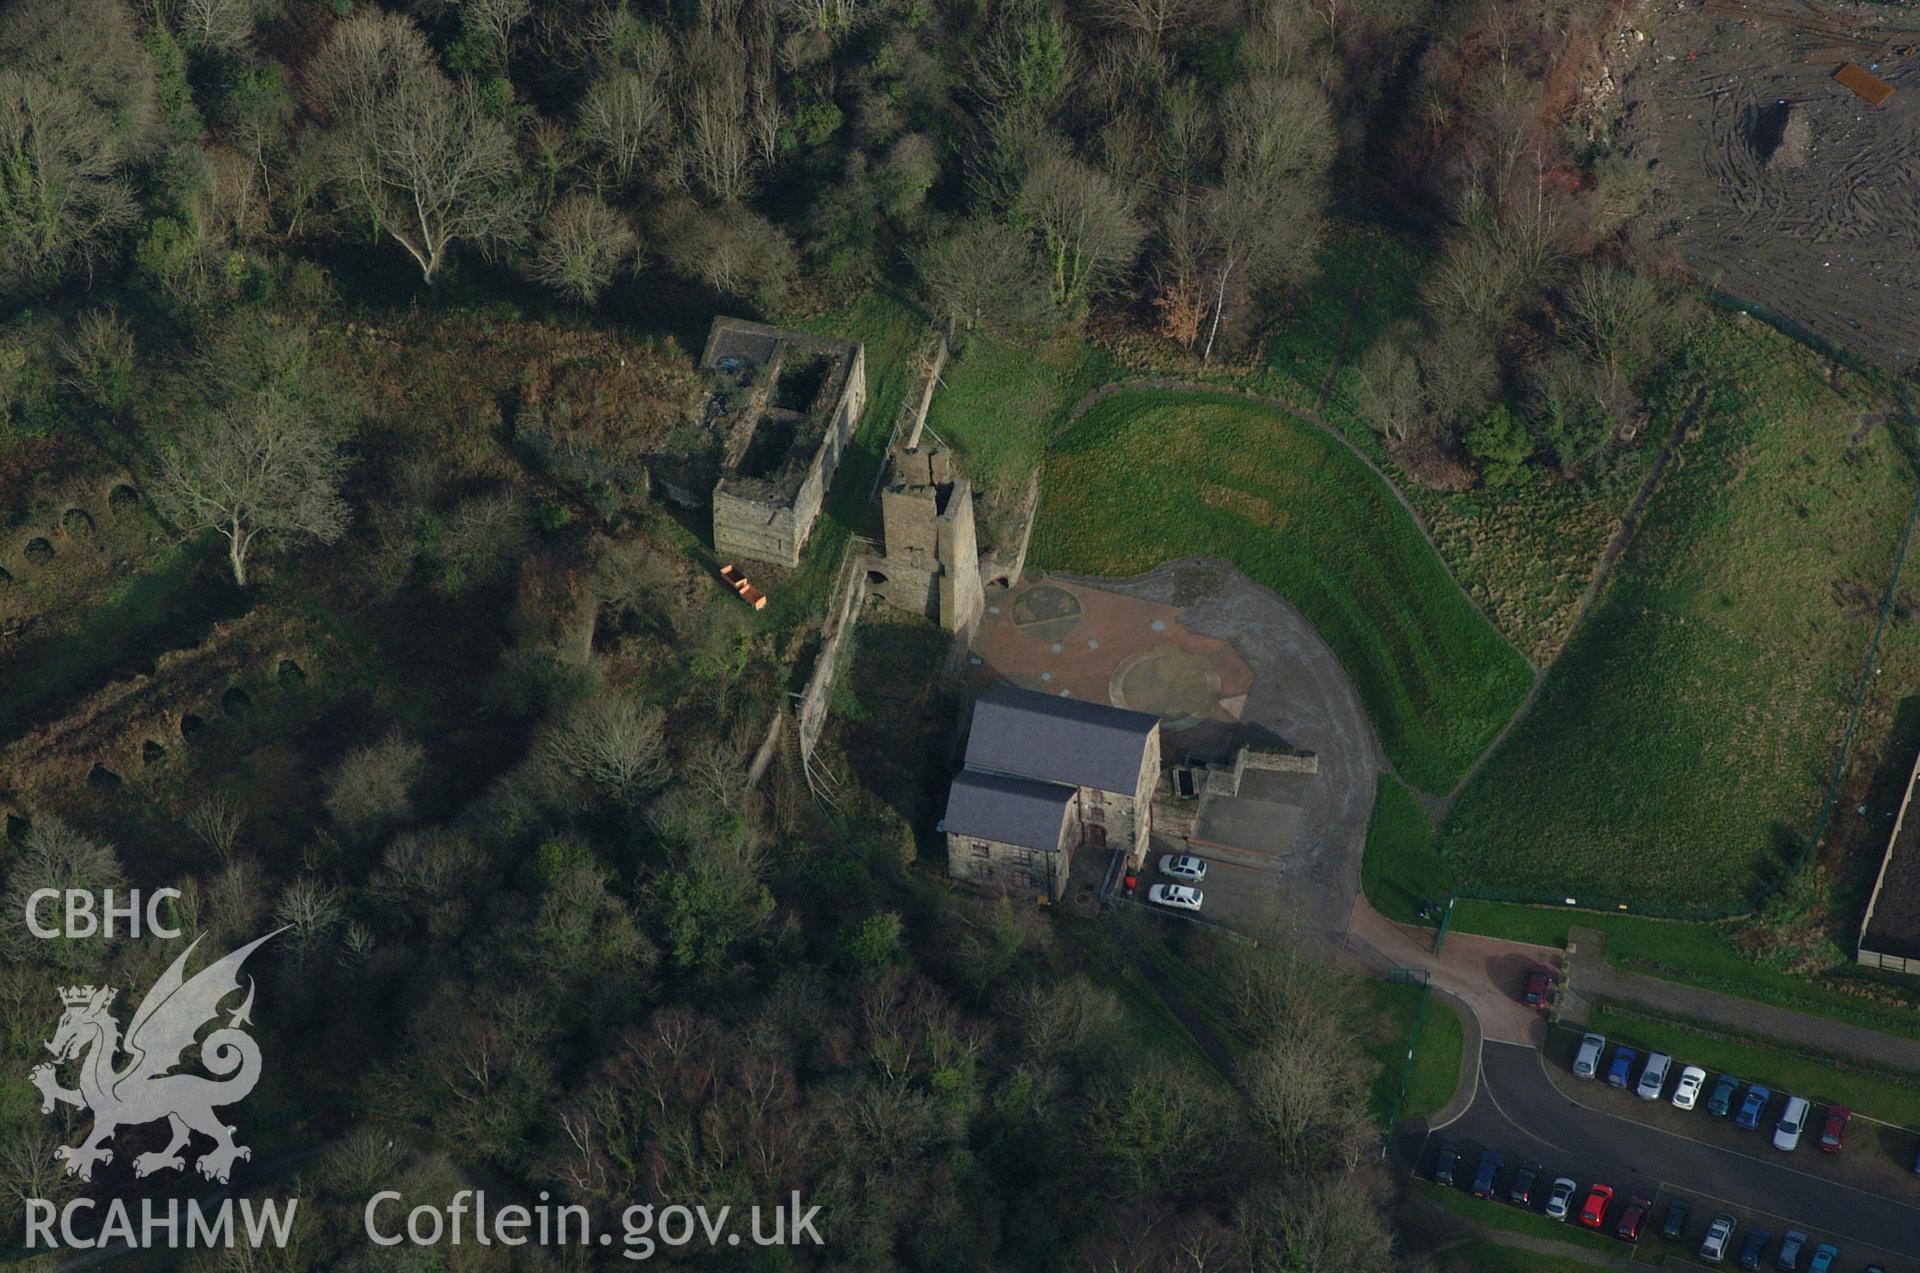 RCAHMW colour oblique aerial photograph of Tondu Ironworks taken on 13/01/2005 by Toby Driver